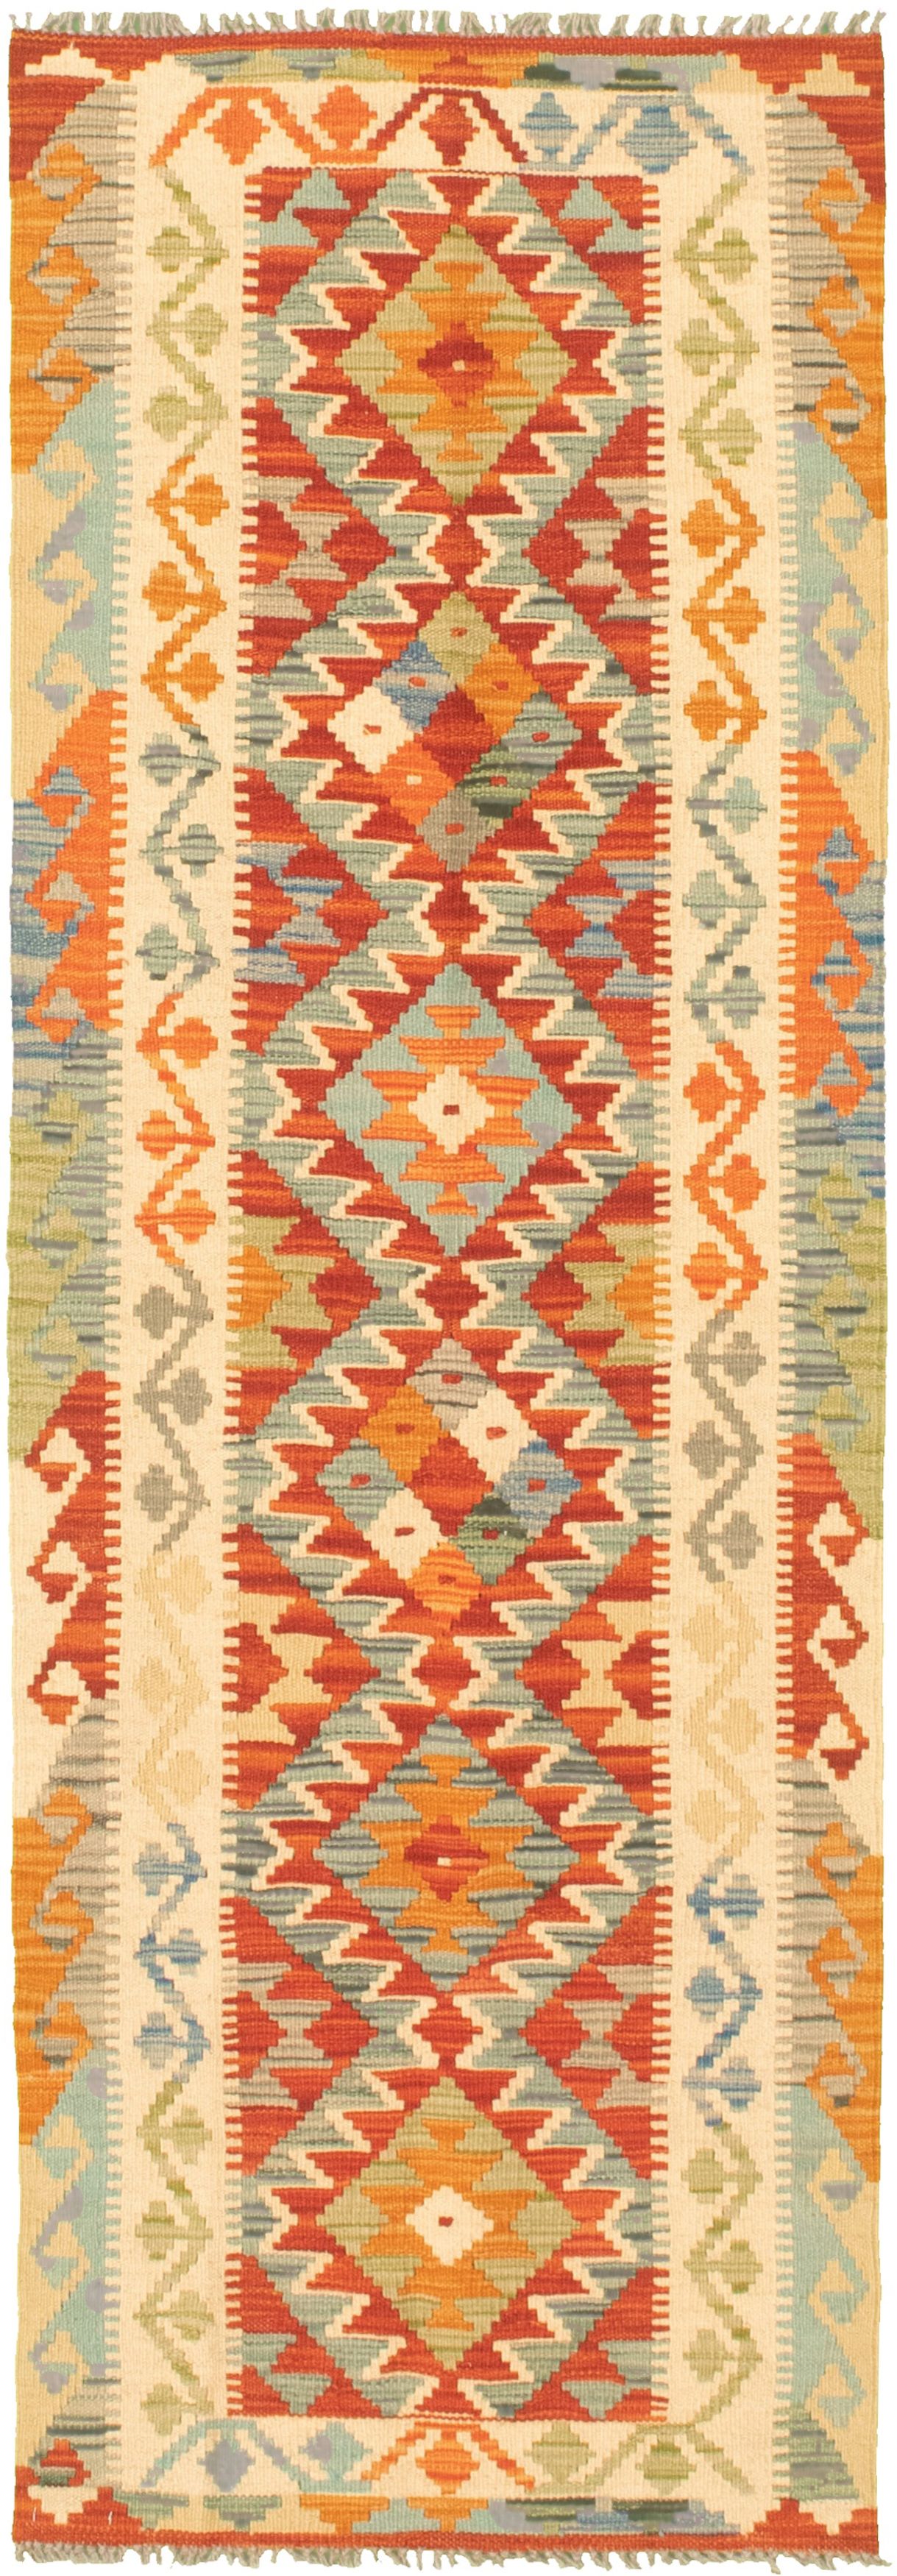 Hand woven Bold and Colorful  Dark Copper Wool Kilim 2'1" x 6'6" Size: 2'1" x 6'6"  